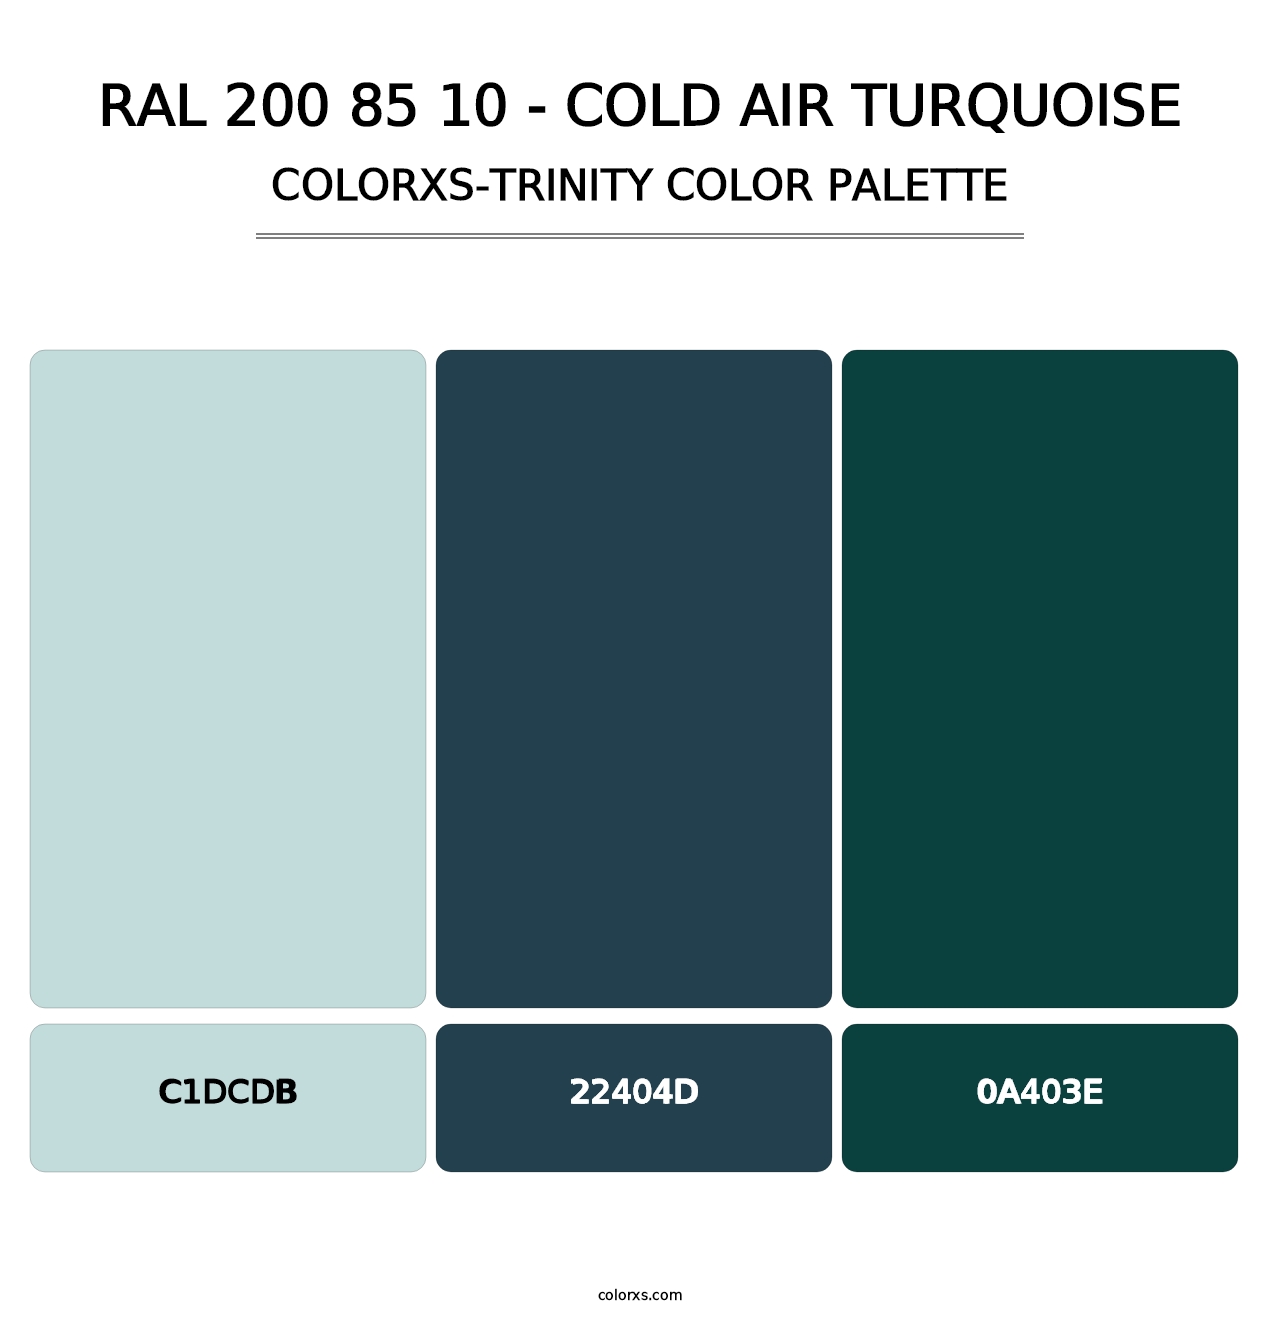 RAL 200 85 10 - Cold Air Turquoise - Colorxs Trinity Palette